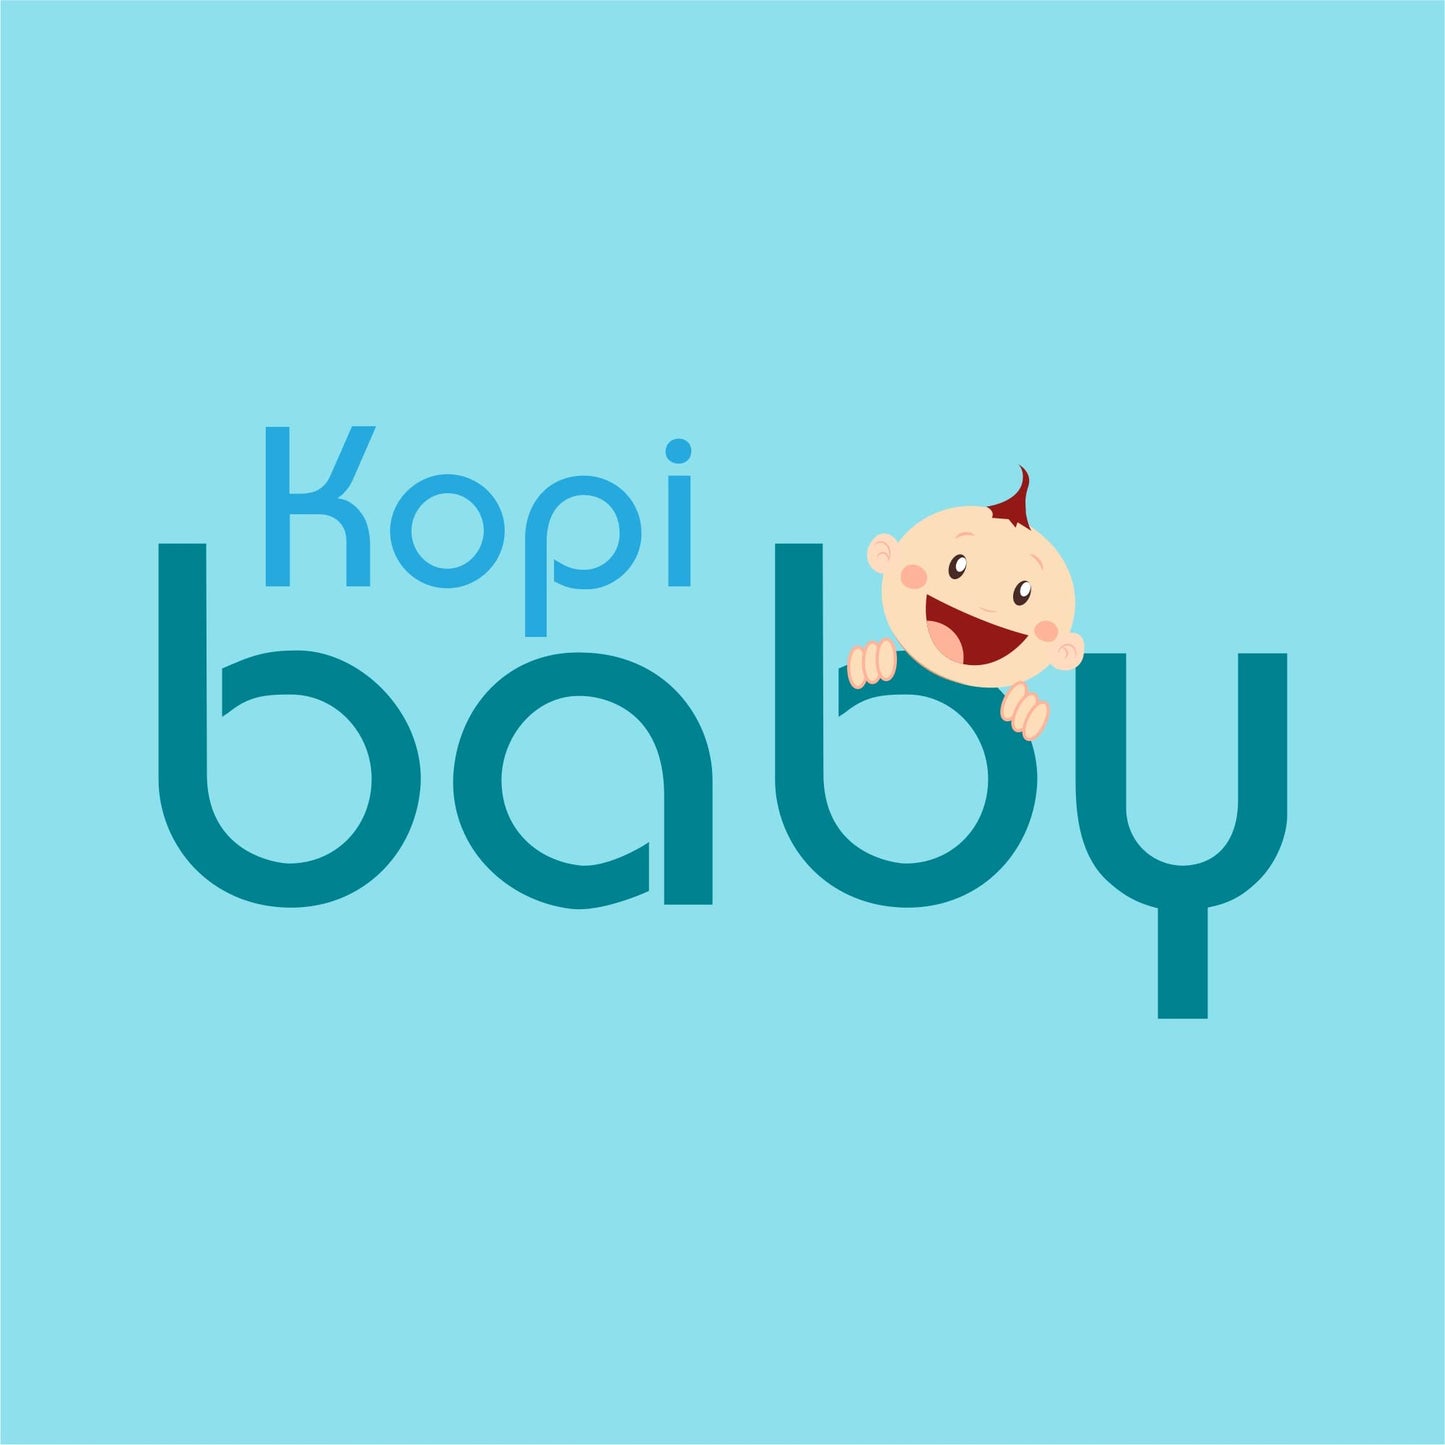 Portable Diaper Changing Pad, Portable Changing pad for Newborn Girl & Boy - Baby Changing Pad with Smart Wipes Pocket – Waterproof Travel Changing Kit - Baby Gift by Kopi Baby